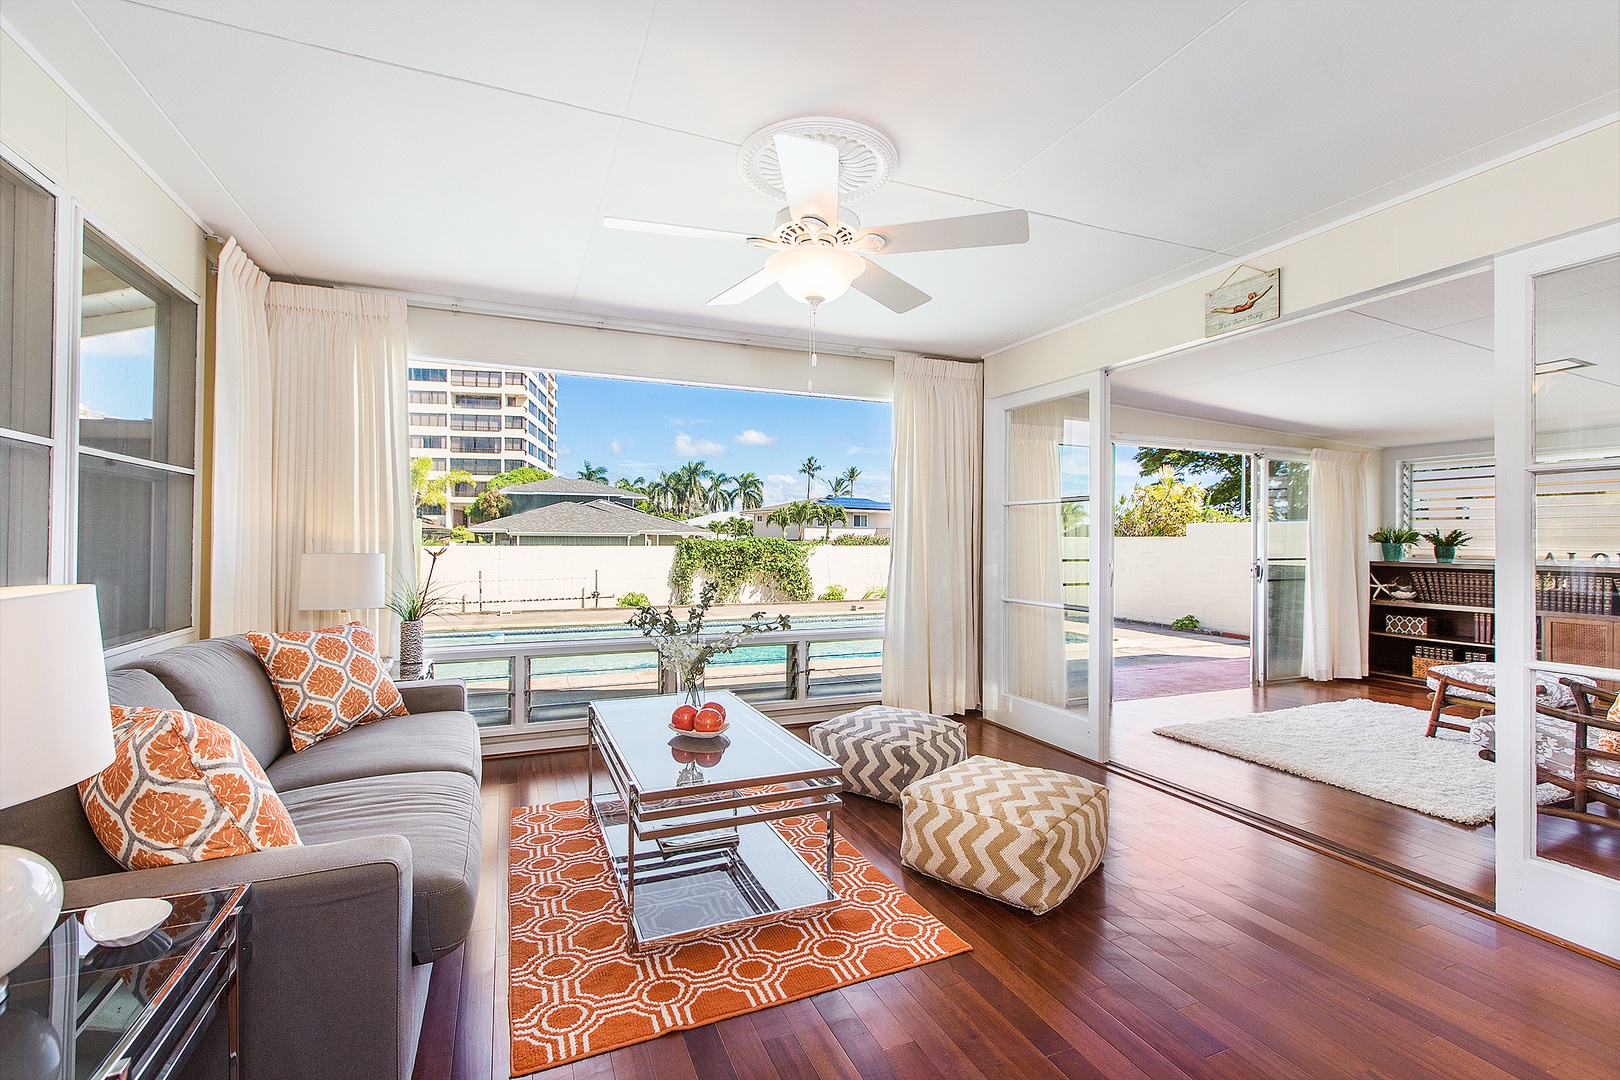 Honolulu Vacation Rentals, Kahala Cottage - Front living room and pool view.